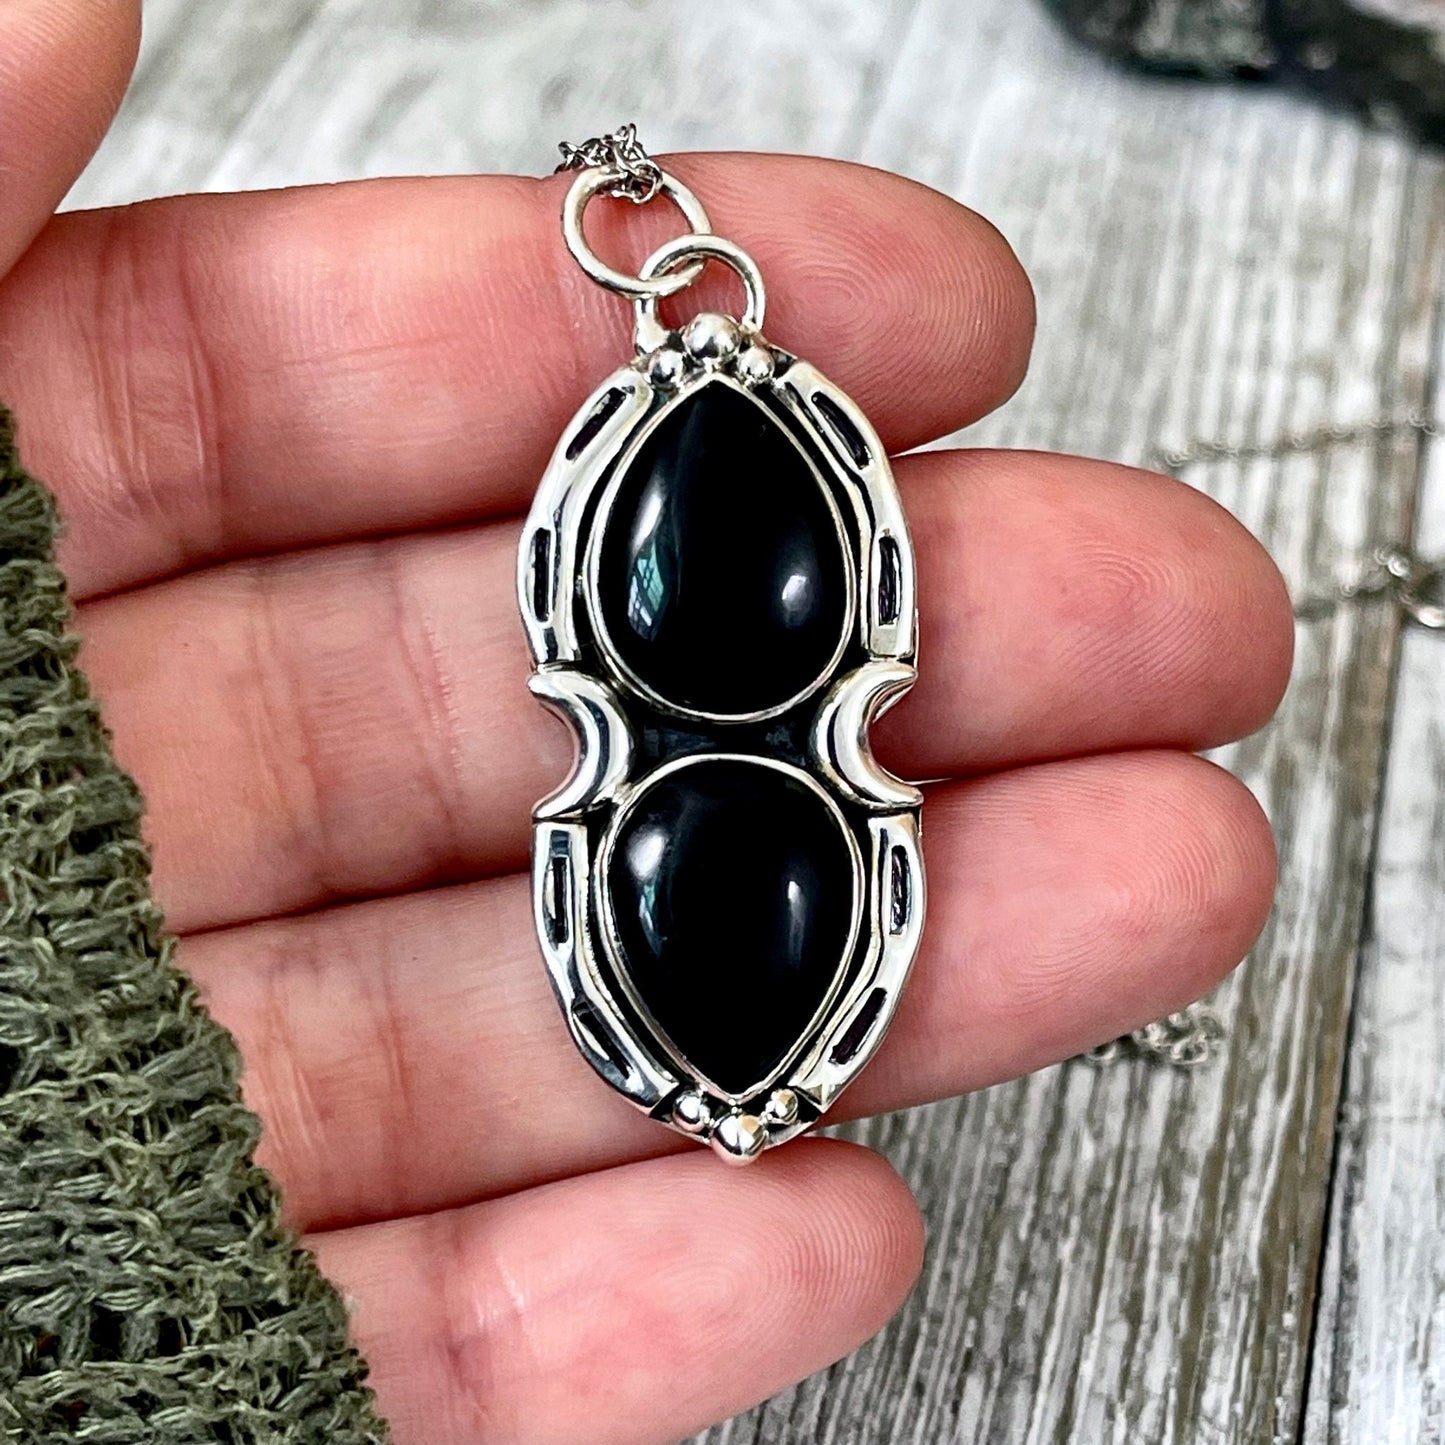 Black Onyx Mystic Moon Crystal Statement Necklace in Sterling Silver / Designed by FOXLARK Collection - Foxlark Crystal Jewelry